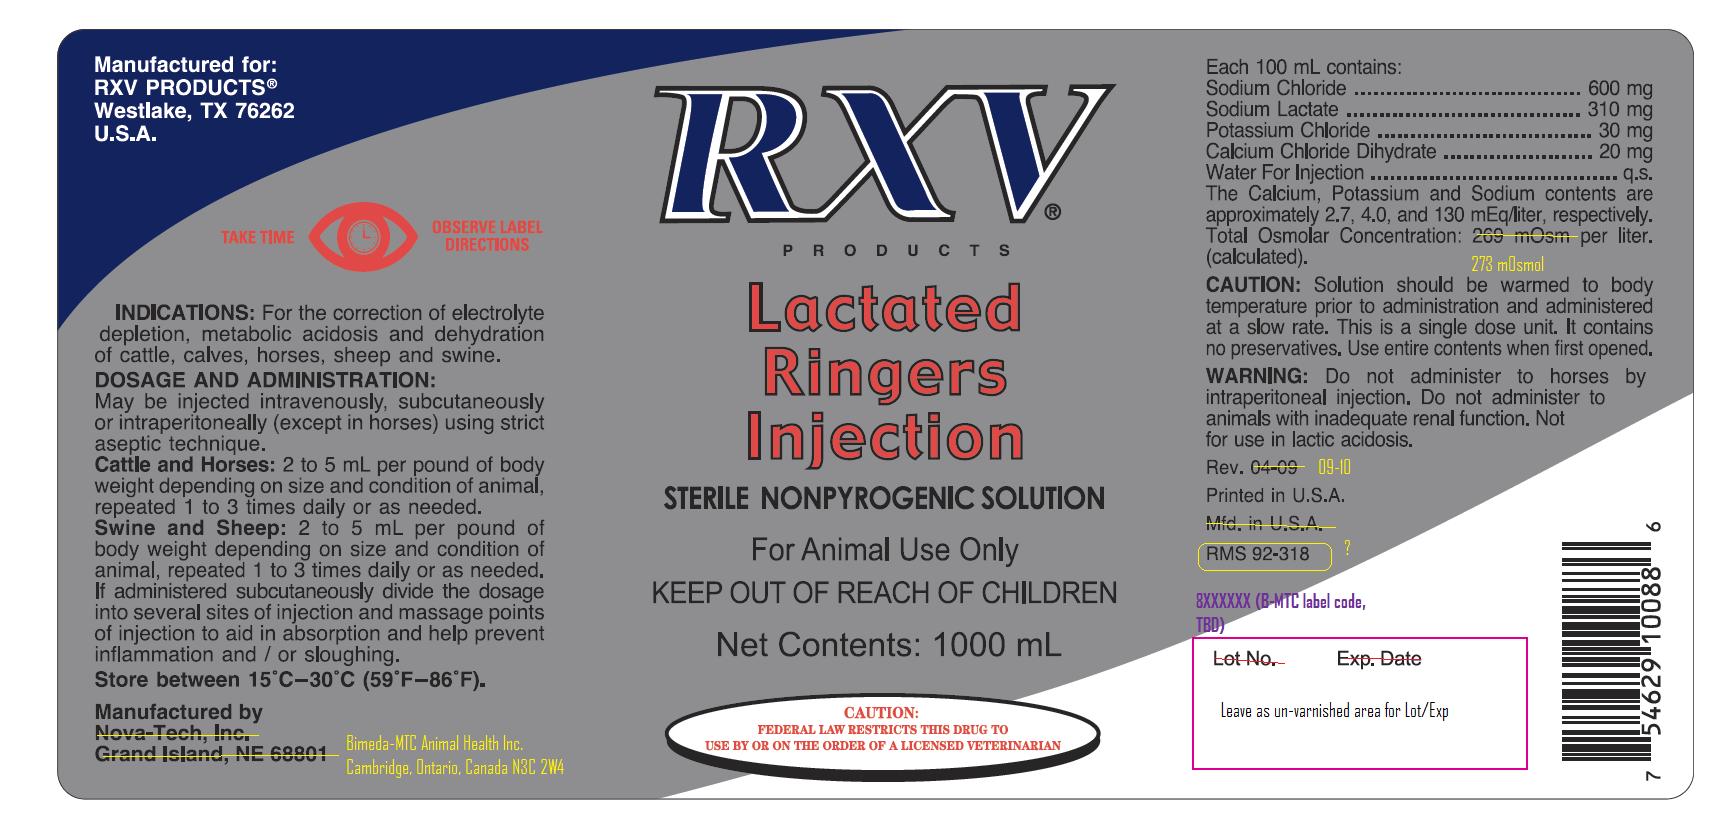 RXV 1000mL Injection